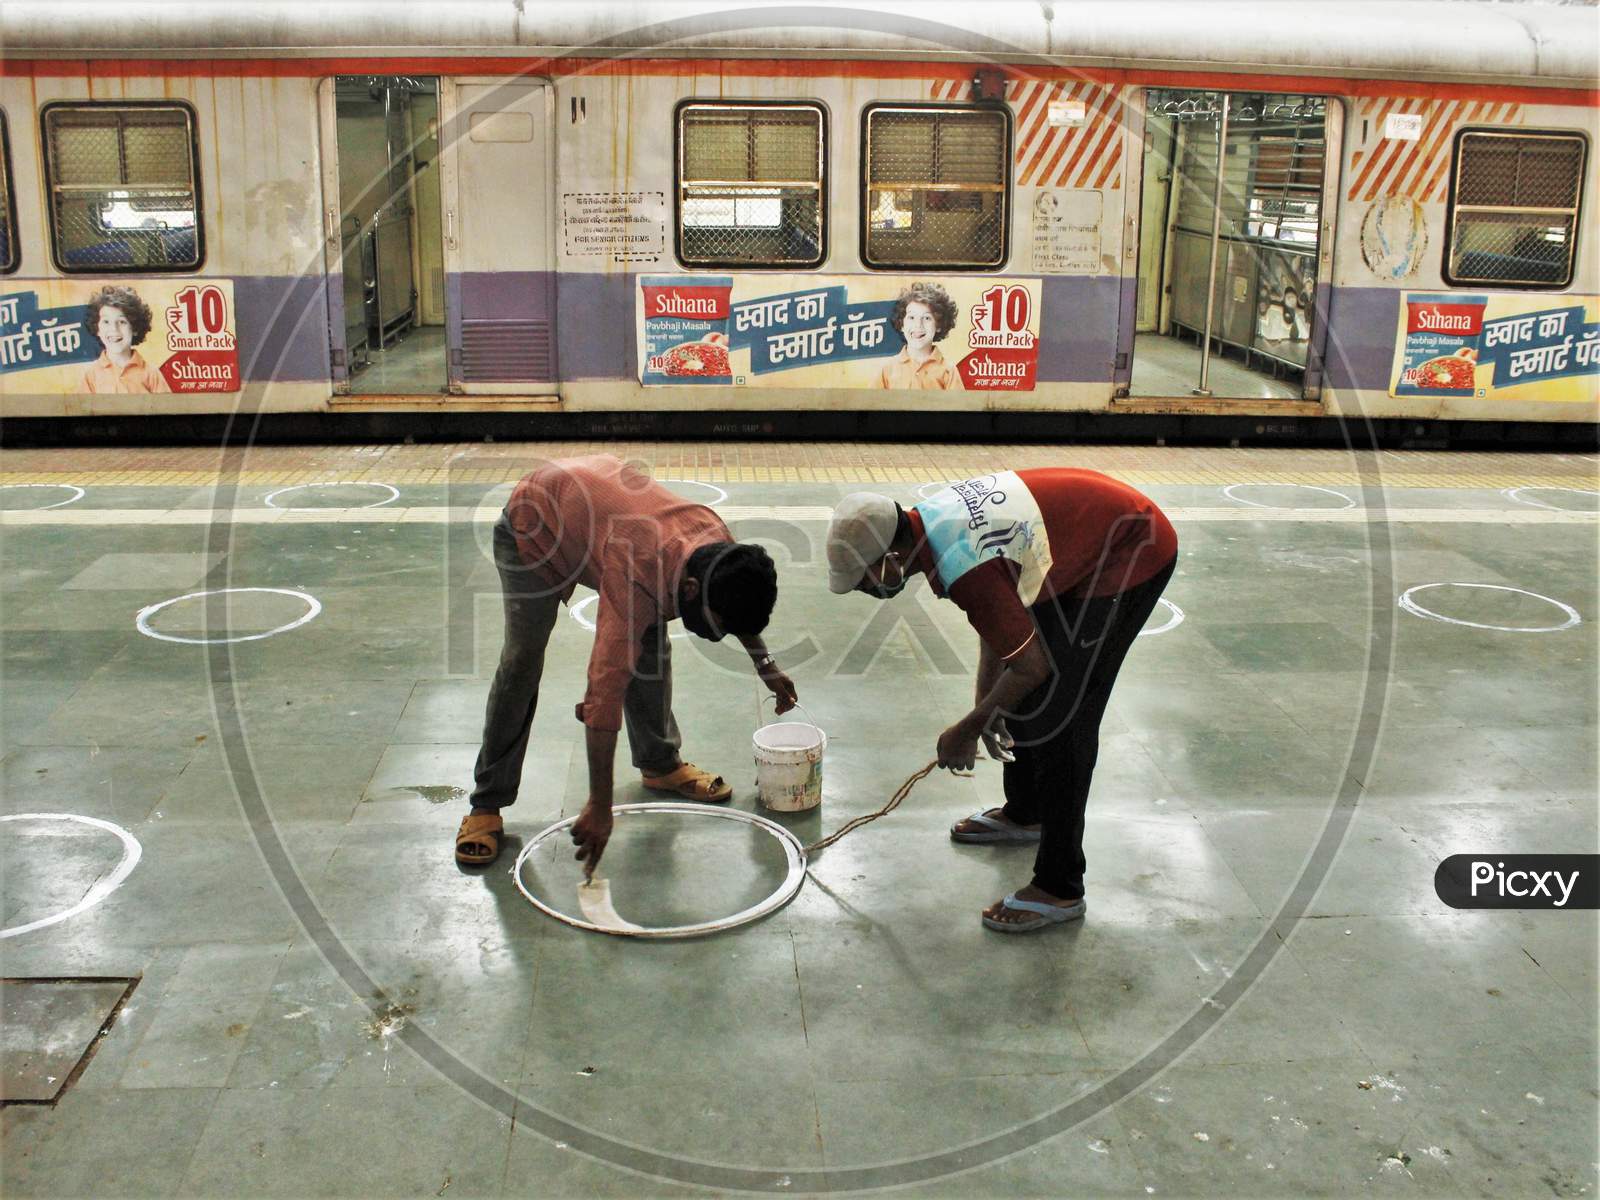 Workers paint circles on the platform for the passengers to maintain social distancing after the government eased a nationwide lockdown which was imposed as a preventive measure against the COVID-19 coronavirus, at the CST local train station, in Mumbai, India, on June 15, 2020.